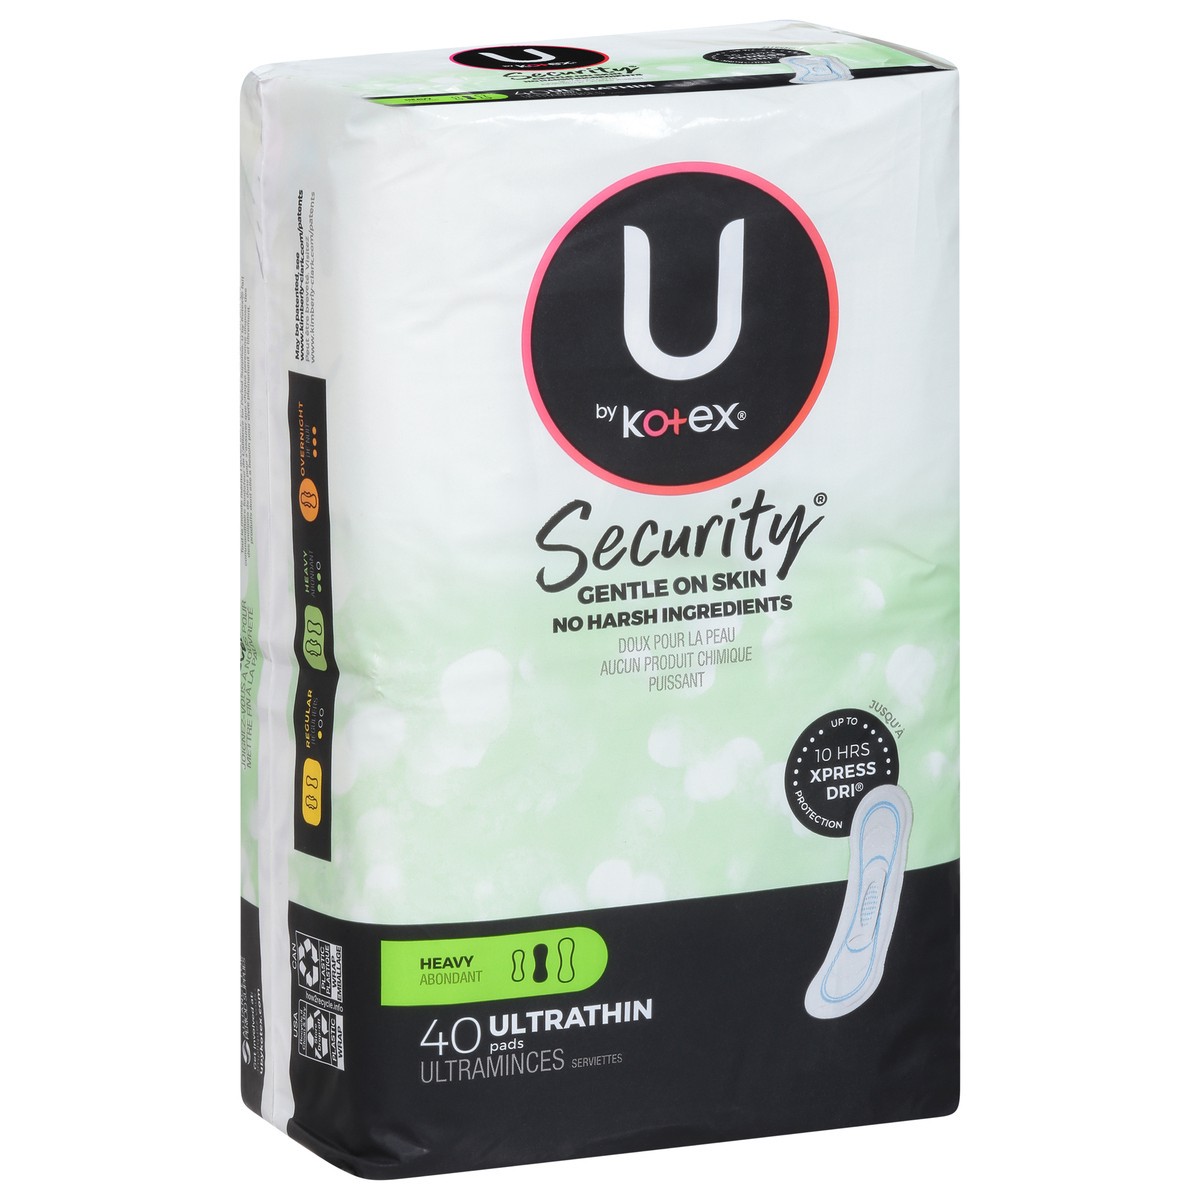 slide 11 of 16, U by Kotex Security Heavy Ultra Thin Pads 40 ea, 40 ct